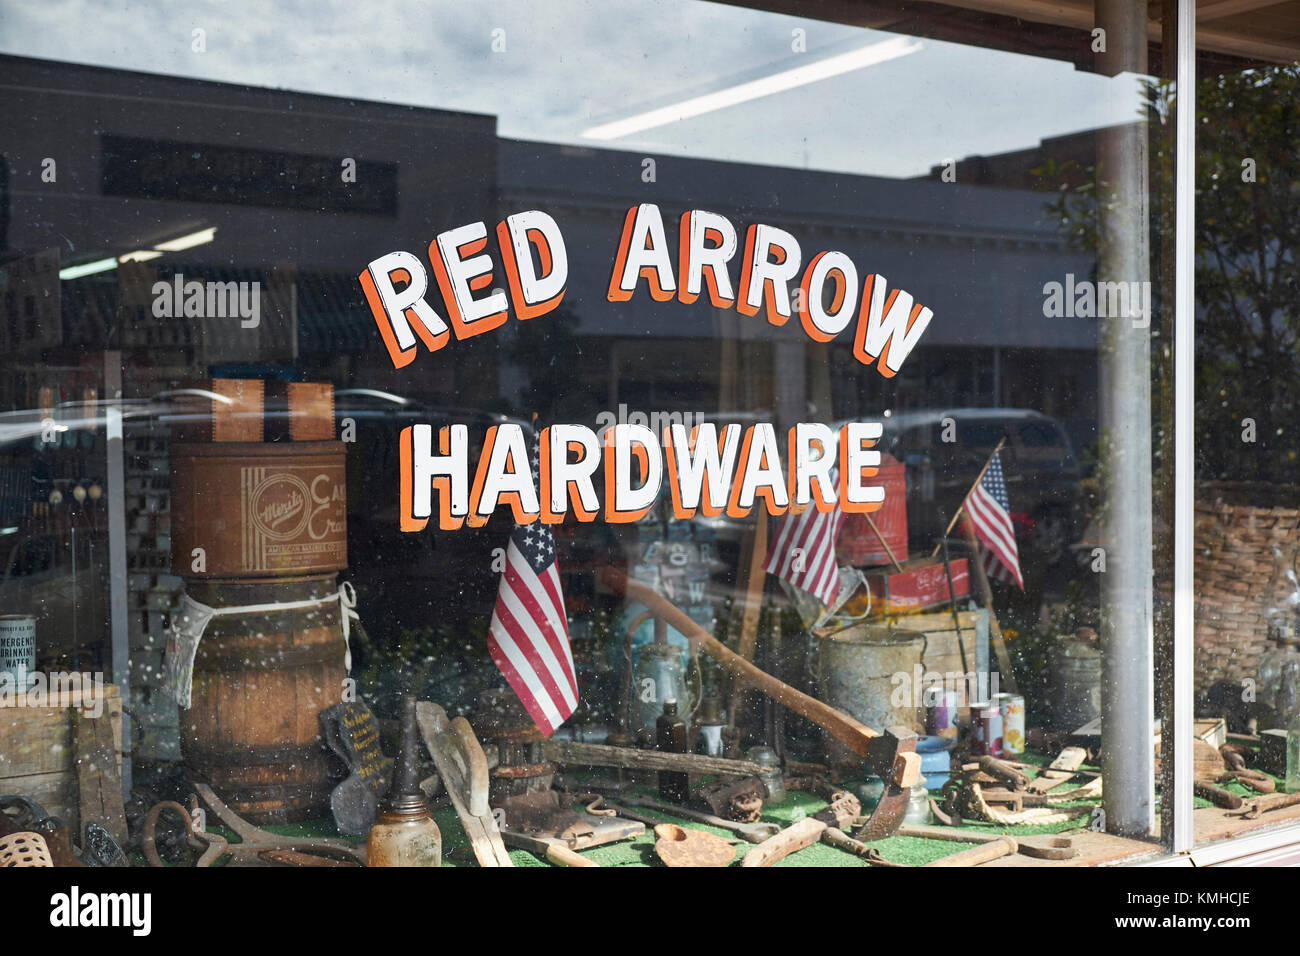 Red Arrow Hardware store vintage window in small rural Alabama town in the southern USA, Prattville Alabama USA. Stock Photo